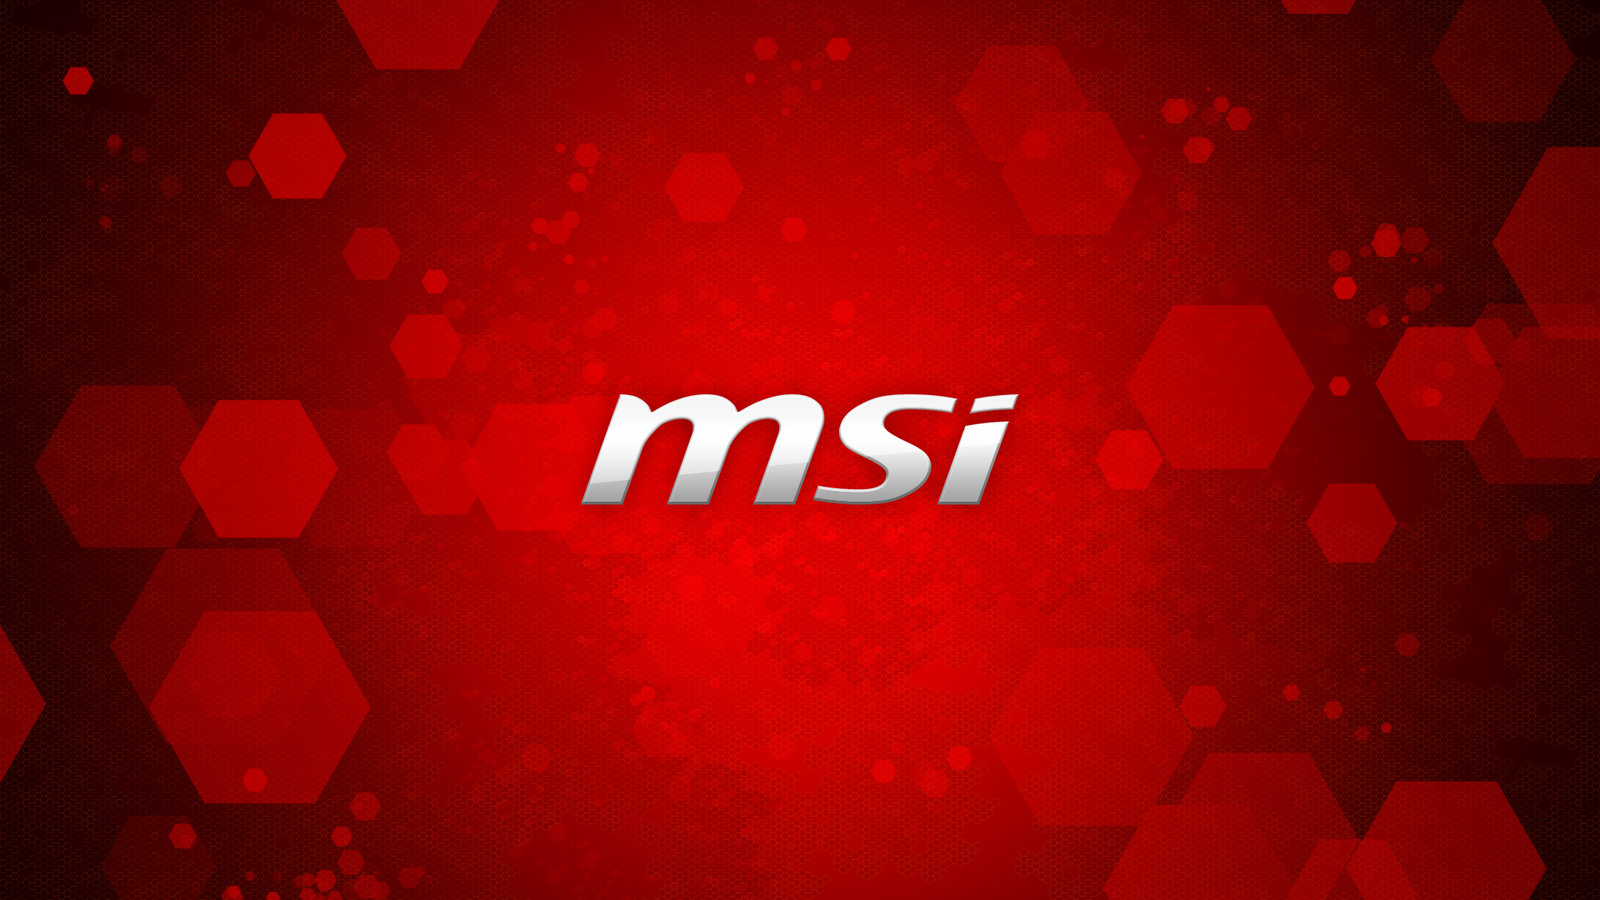 Wallpaper HDtv Widescreen Another Msi Yeah They Re Doing A